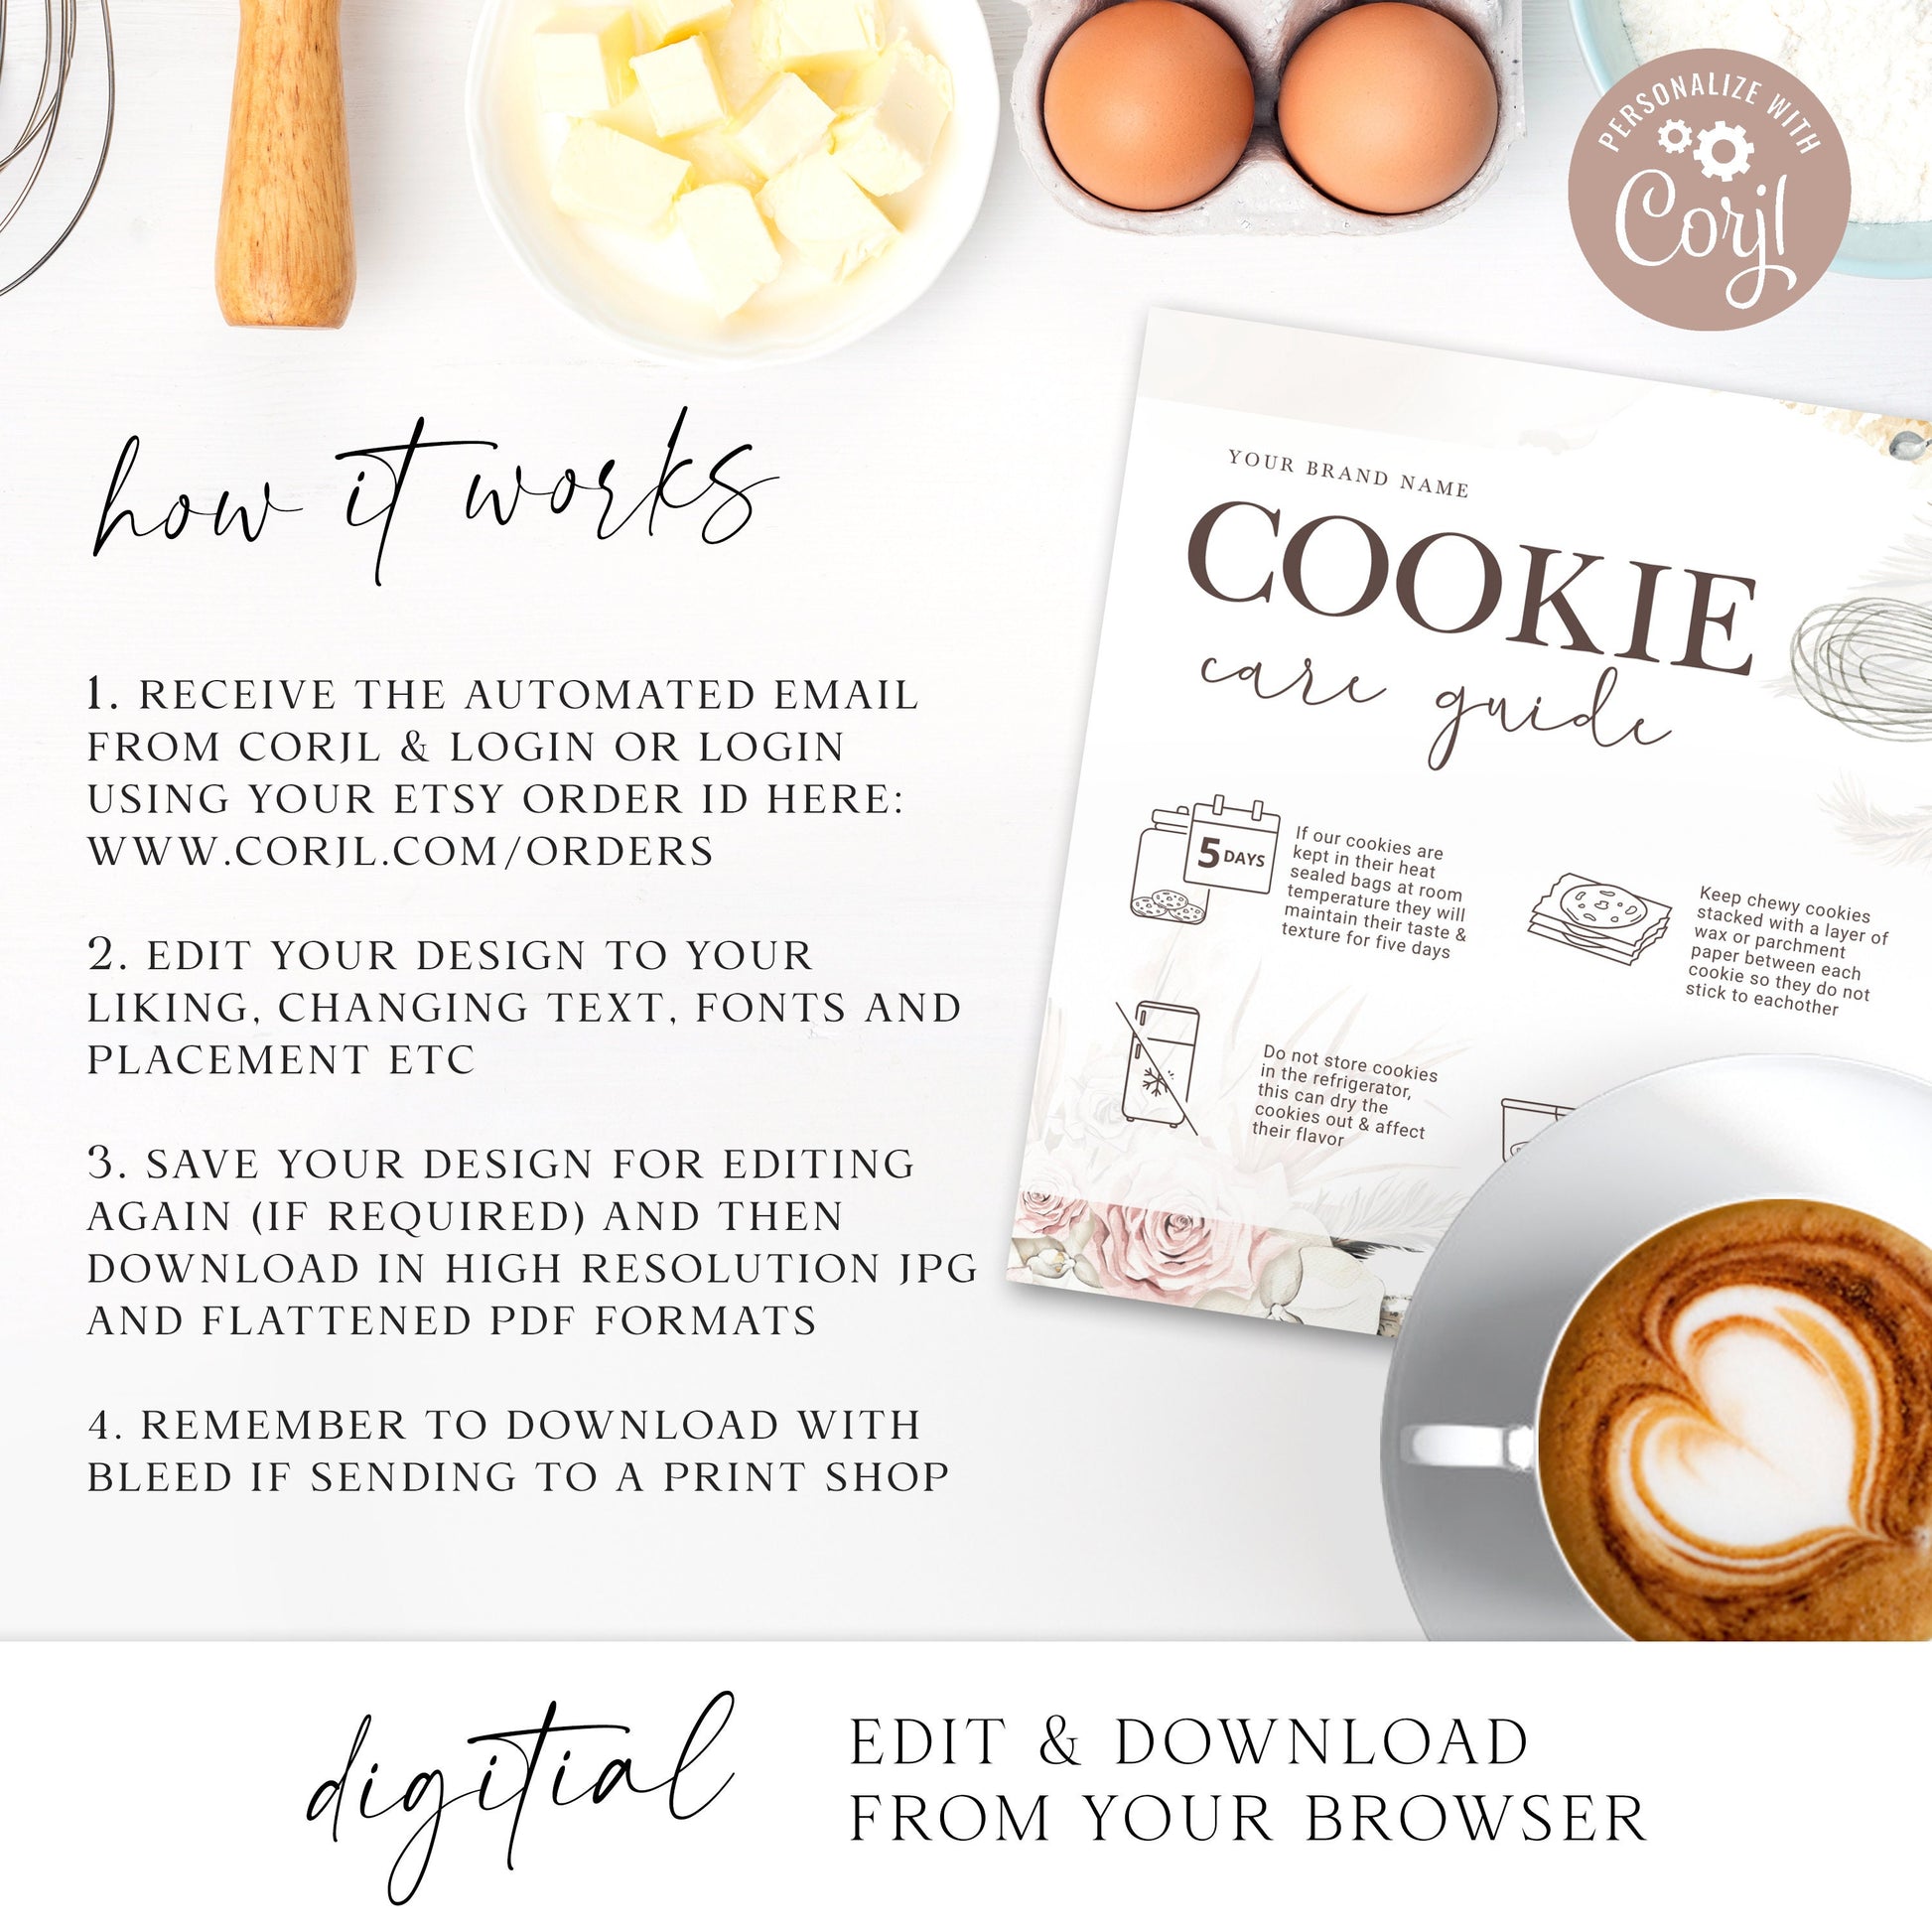 Editable Cookies Care Card, (2 Sizes) Printable Cookie Care Template, Watercolor Whisk Bakery Guide, Rustic Biscuit Care Instructions VB-001